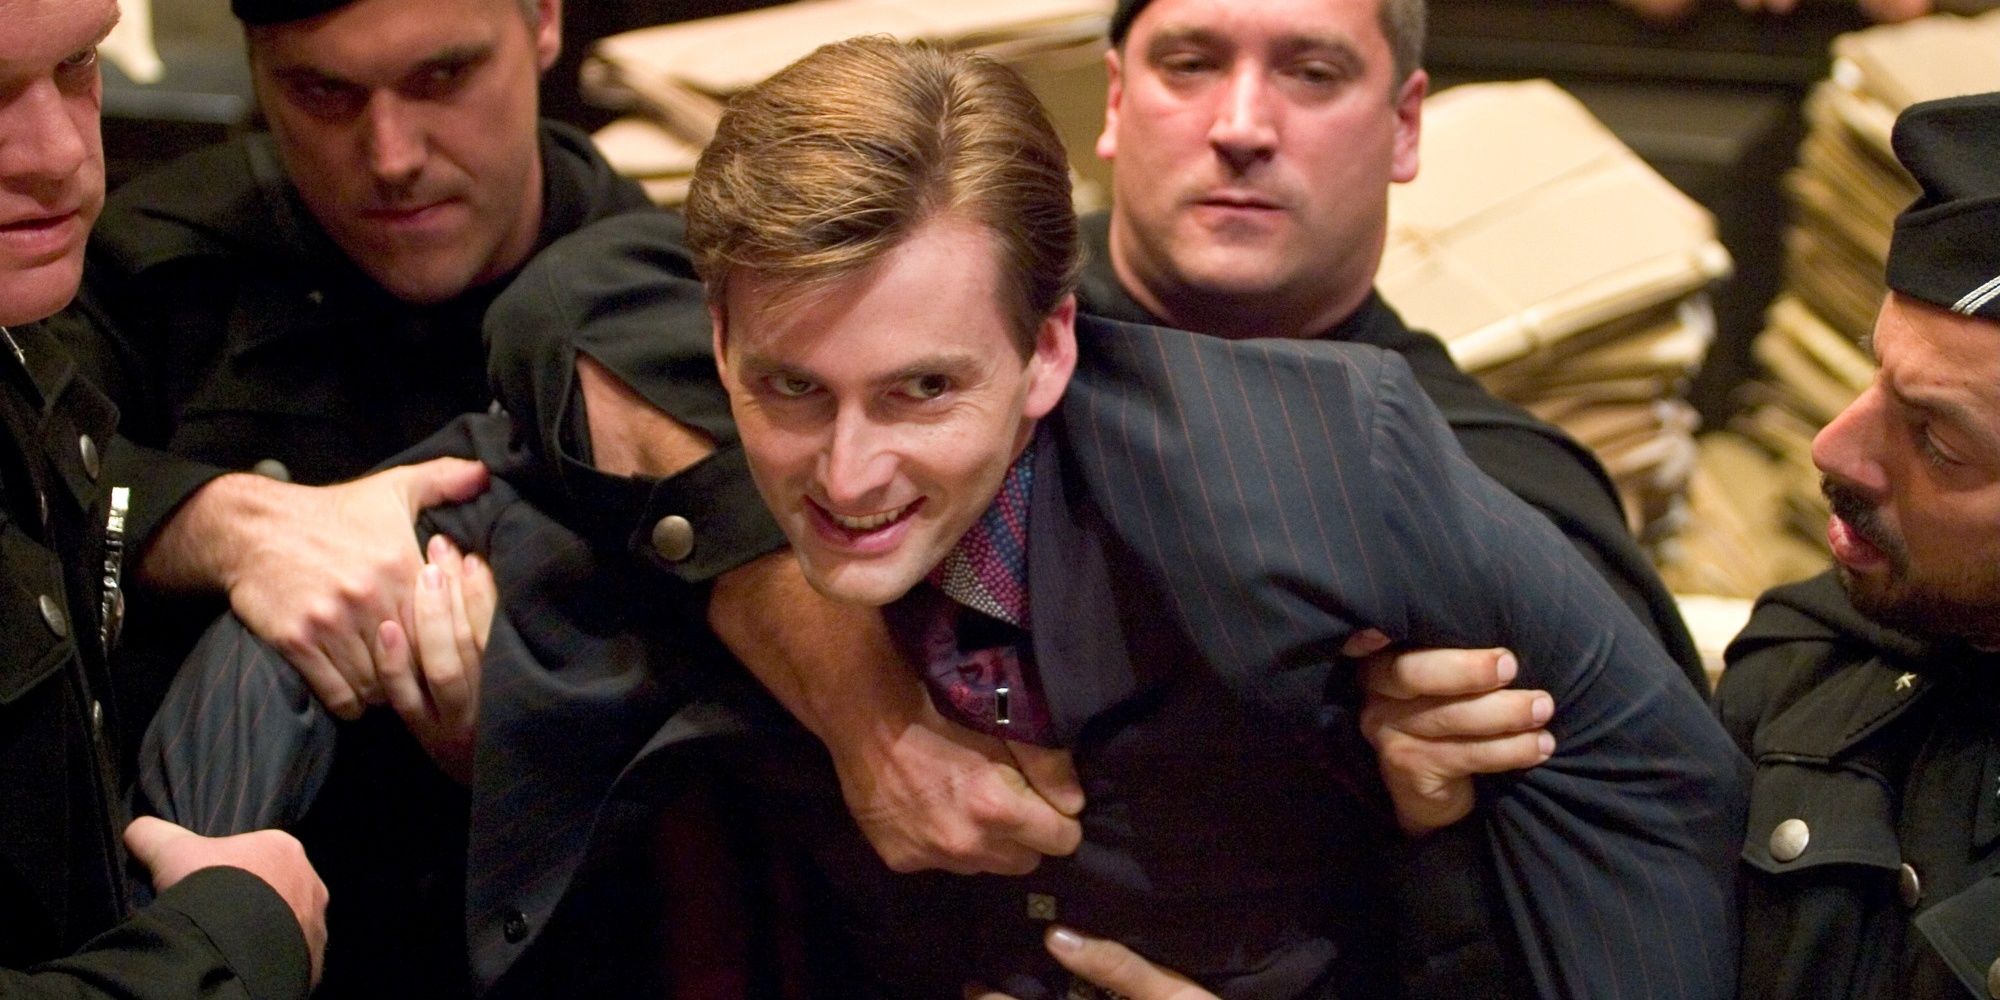 barty crouch jr being apprehended